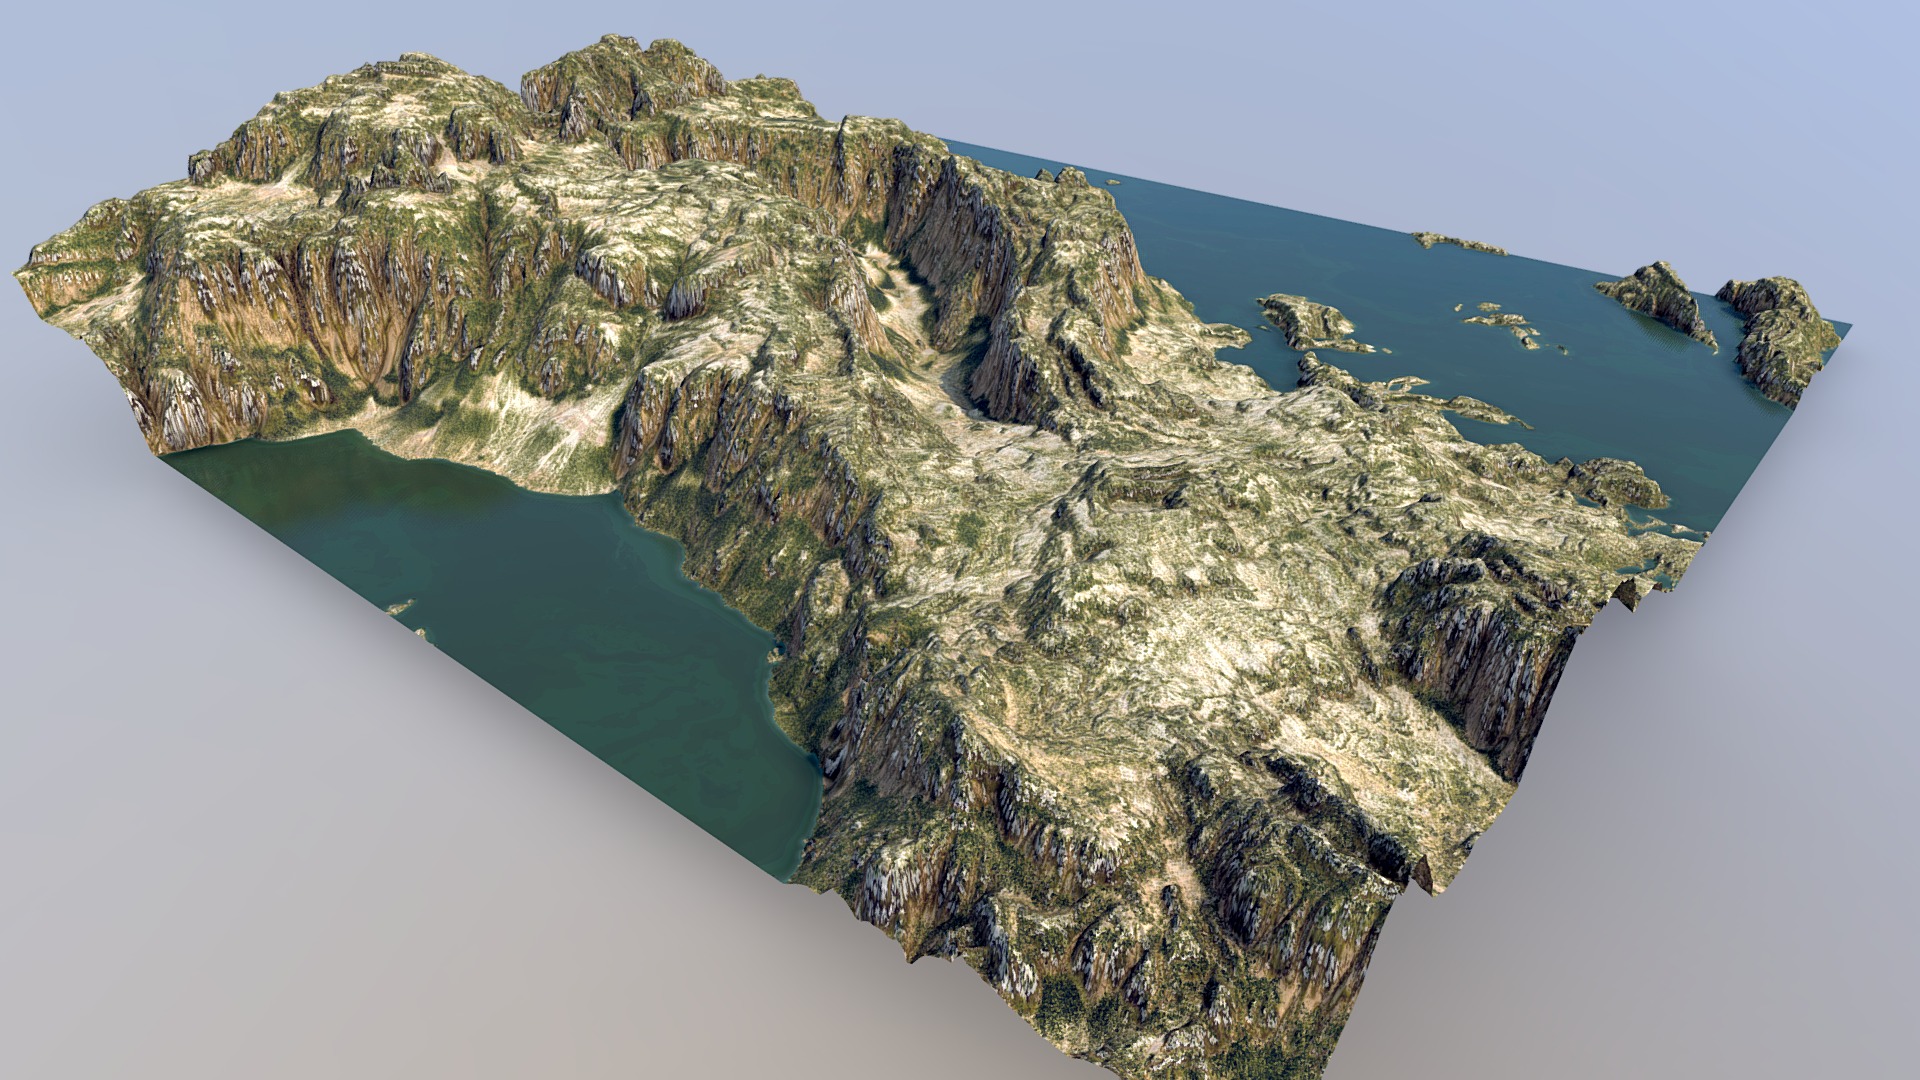 3D model Winding Chasm Badlands – Flooded - This is a 3D model of the Winding Chasm Badlands - Flooded. The 3D model is about a rocky island with a body of water in the middle.